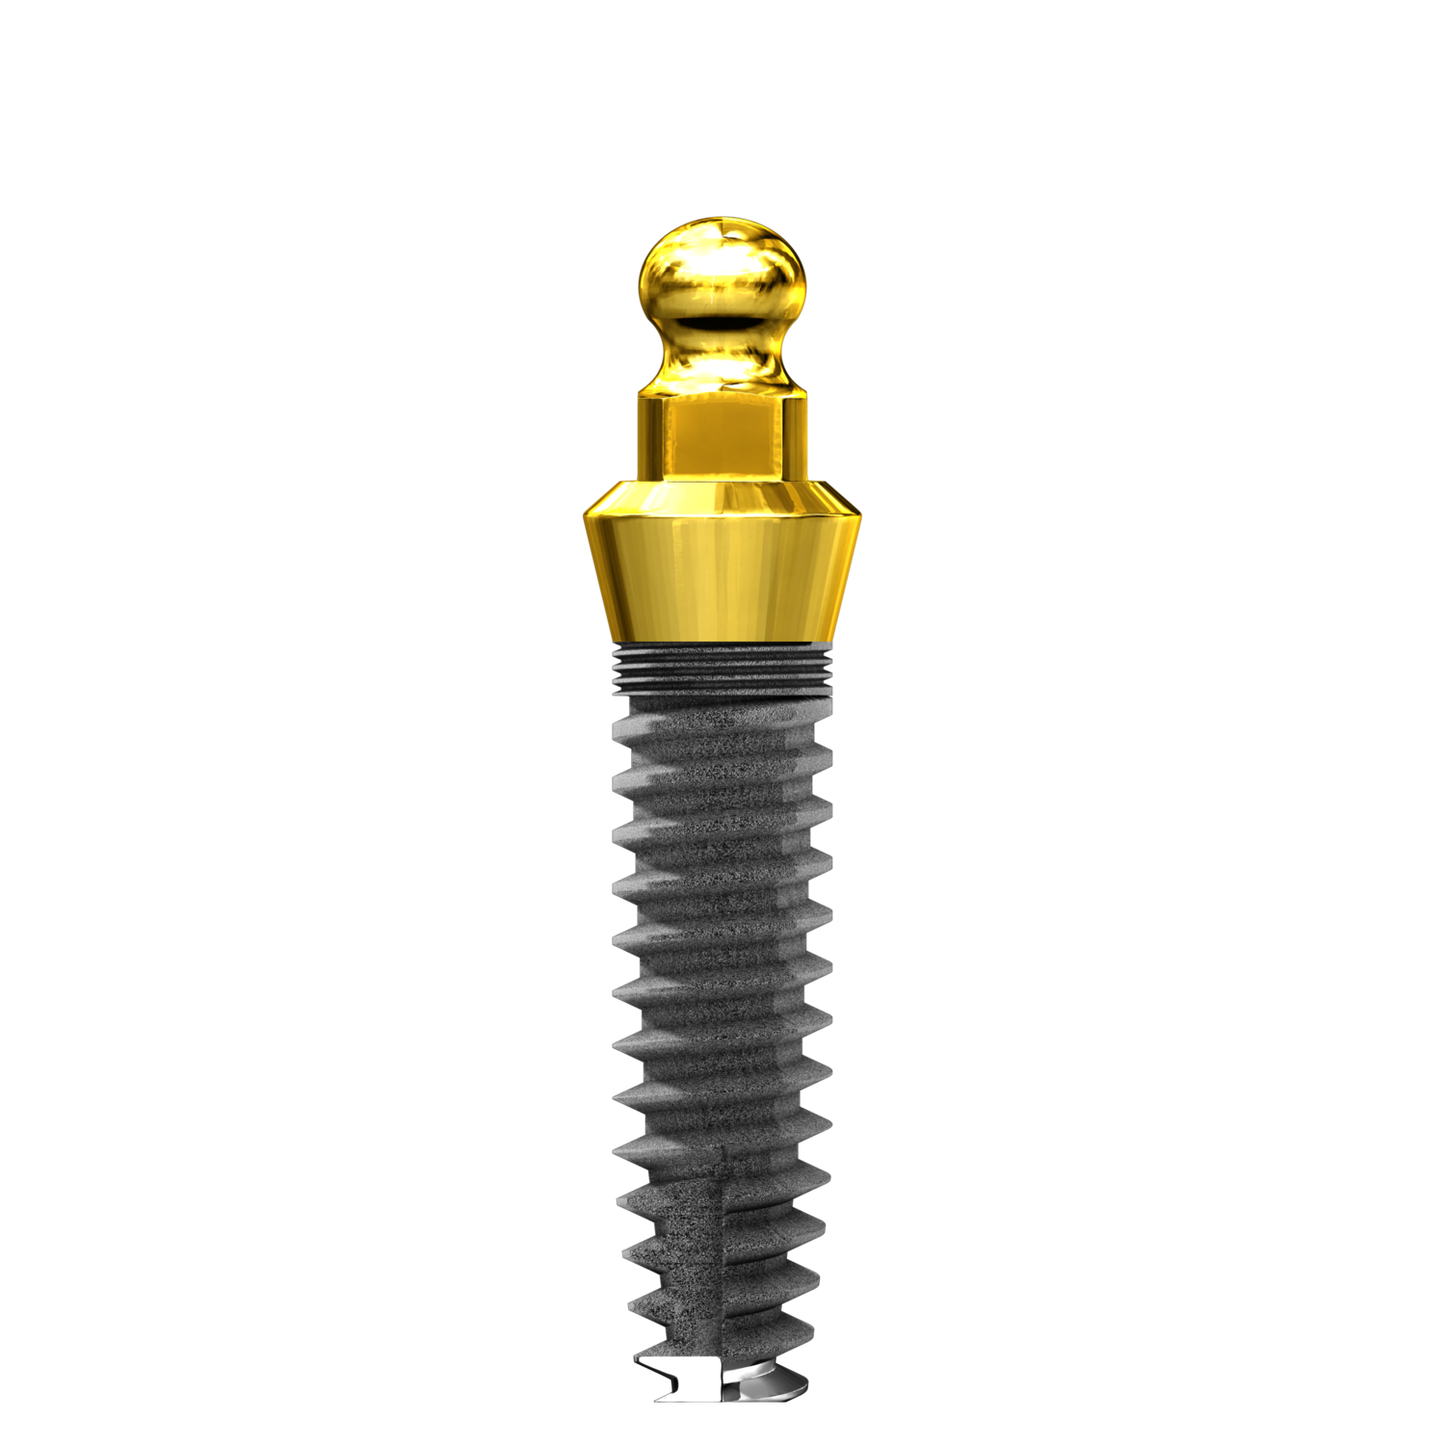 3.25mm x 16mm ISI C&B One Piece Implant